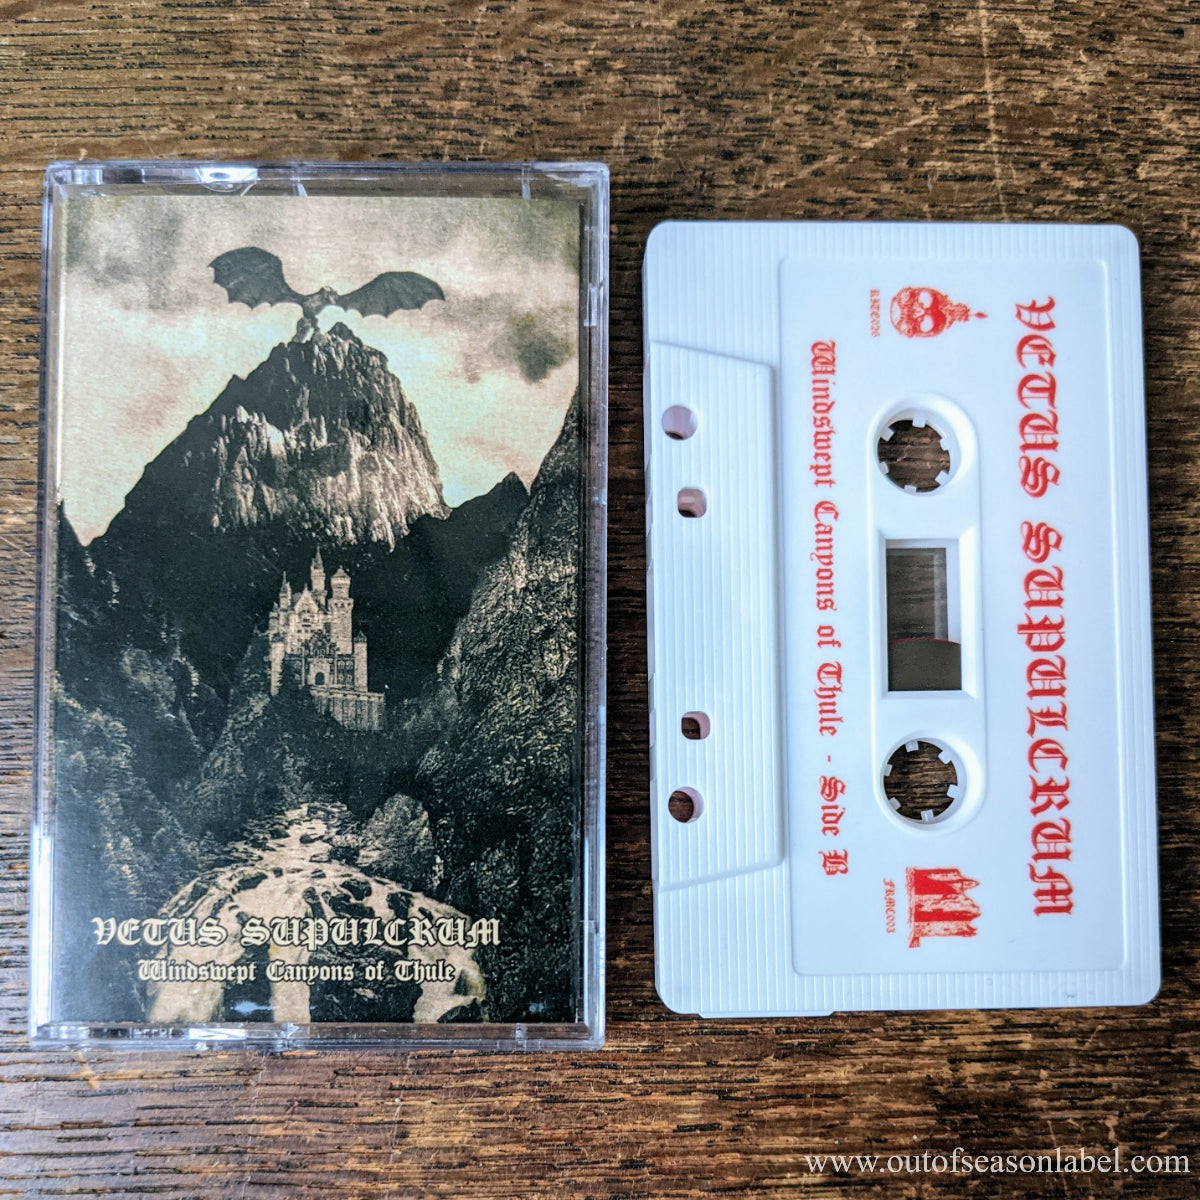 [SOLD OUT] VETUS SUPULCRUM "Windswept Canyons Of Thule" Cassette Tape (Lim. 150)